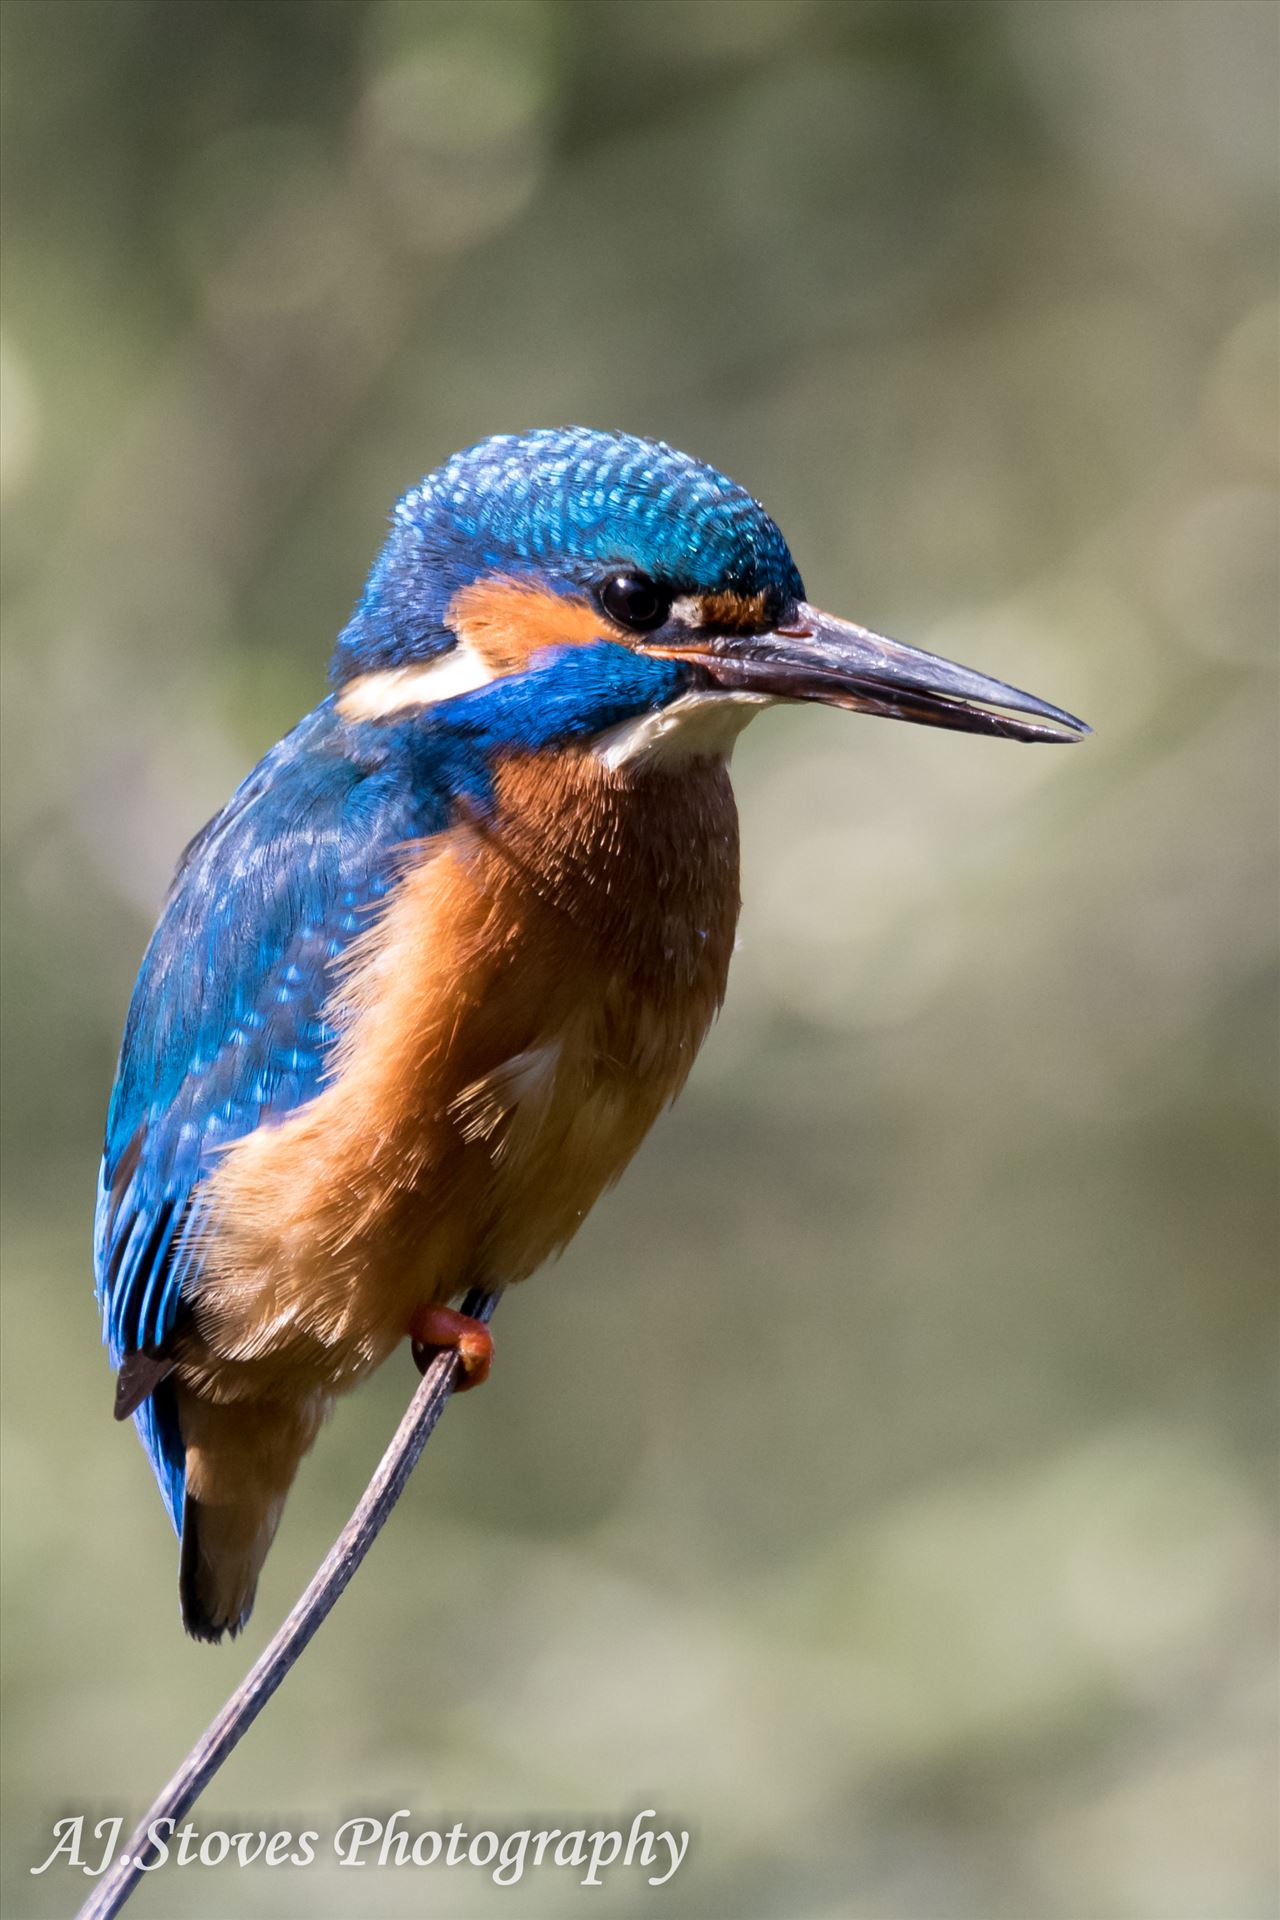 Kingfisher 02 - Kingfishers are just so lovely to photograph, but they are very hard to find and then get them to sit for a photograph by AJ Stoves Photography